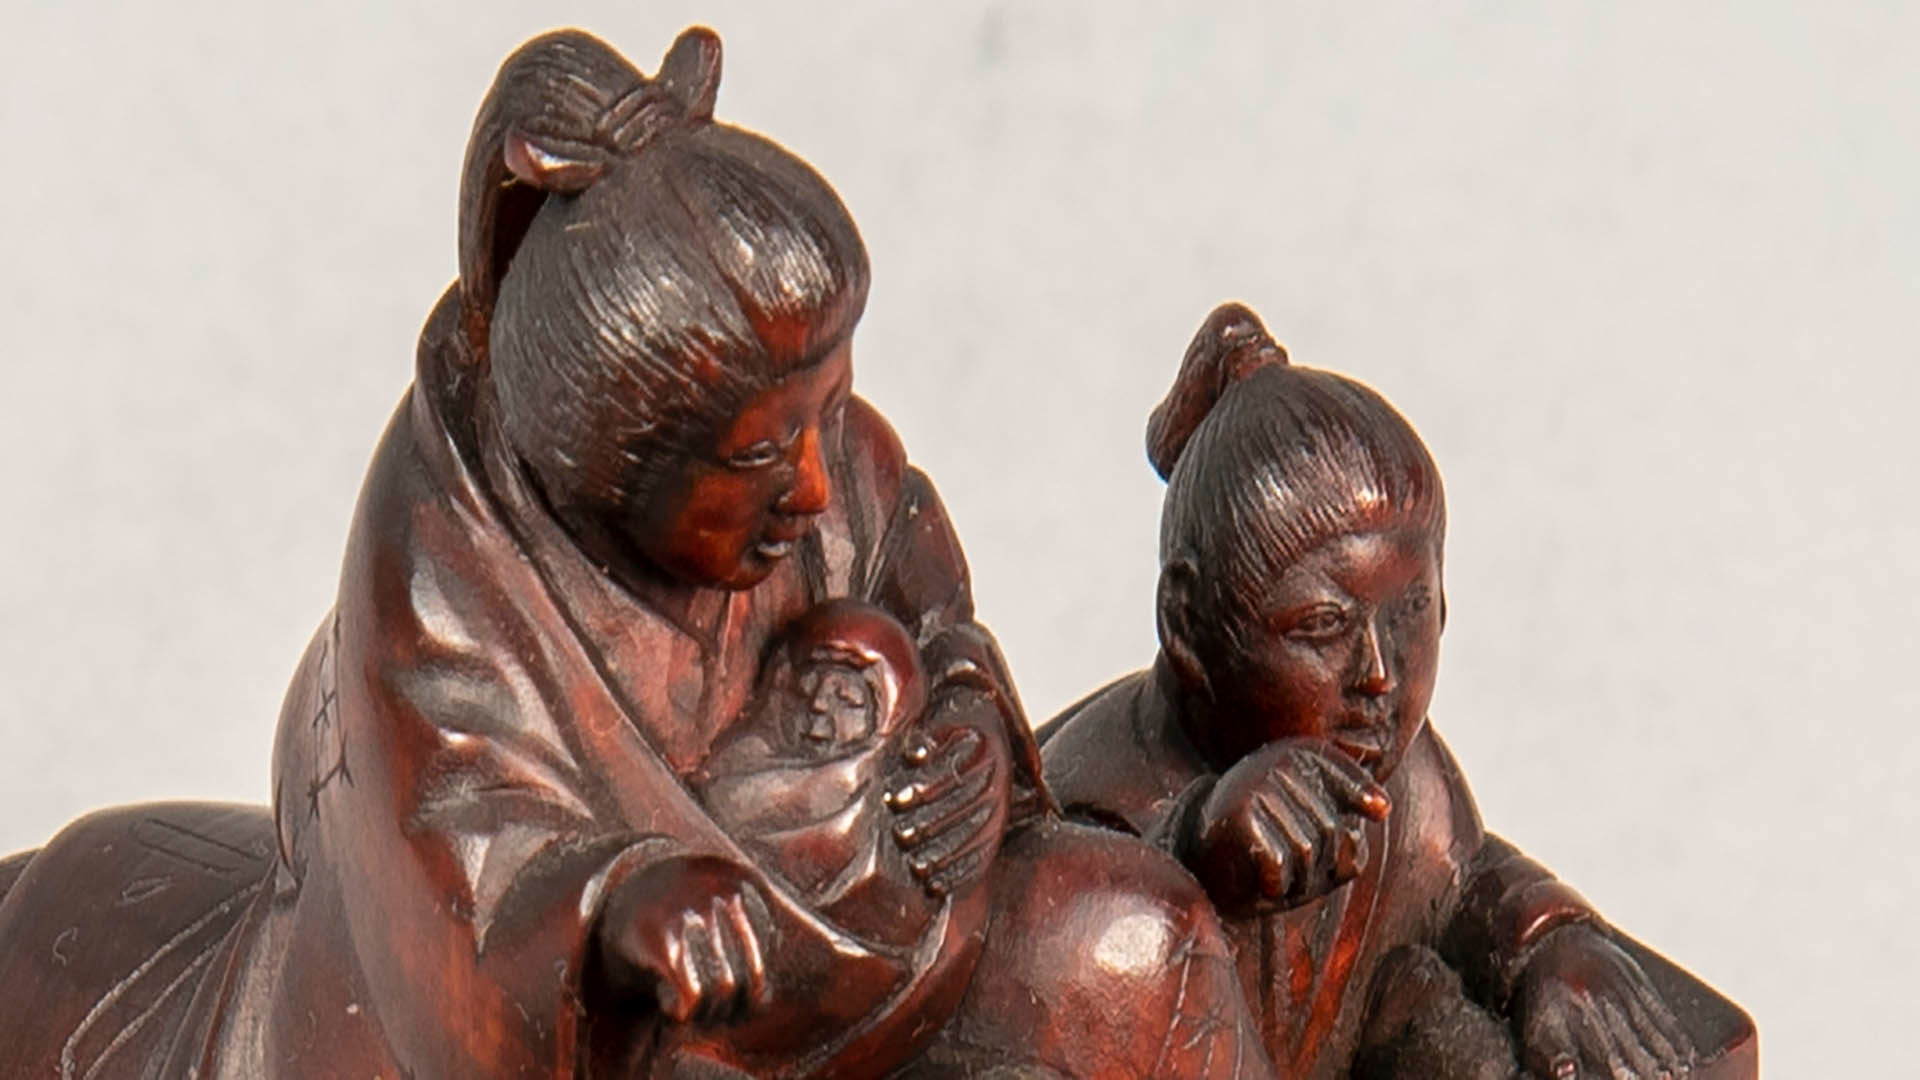 red japanese sculpture of a mother cradling a newborn baby, an older child is sitting next to her